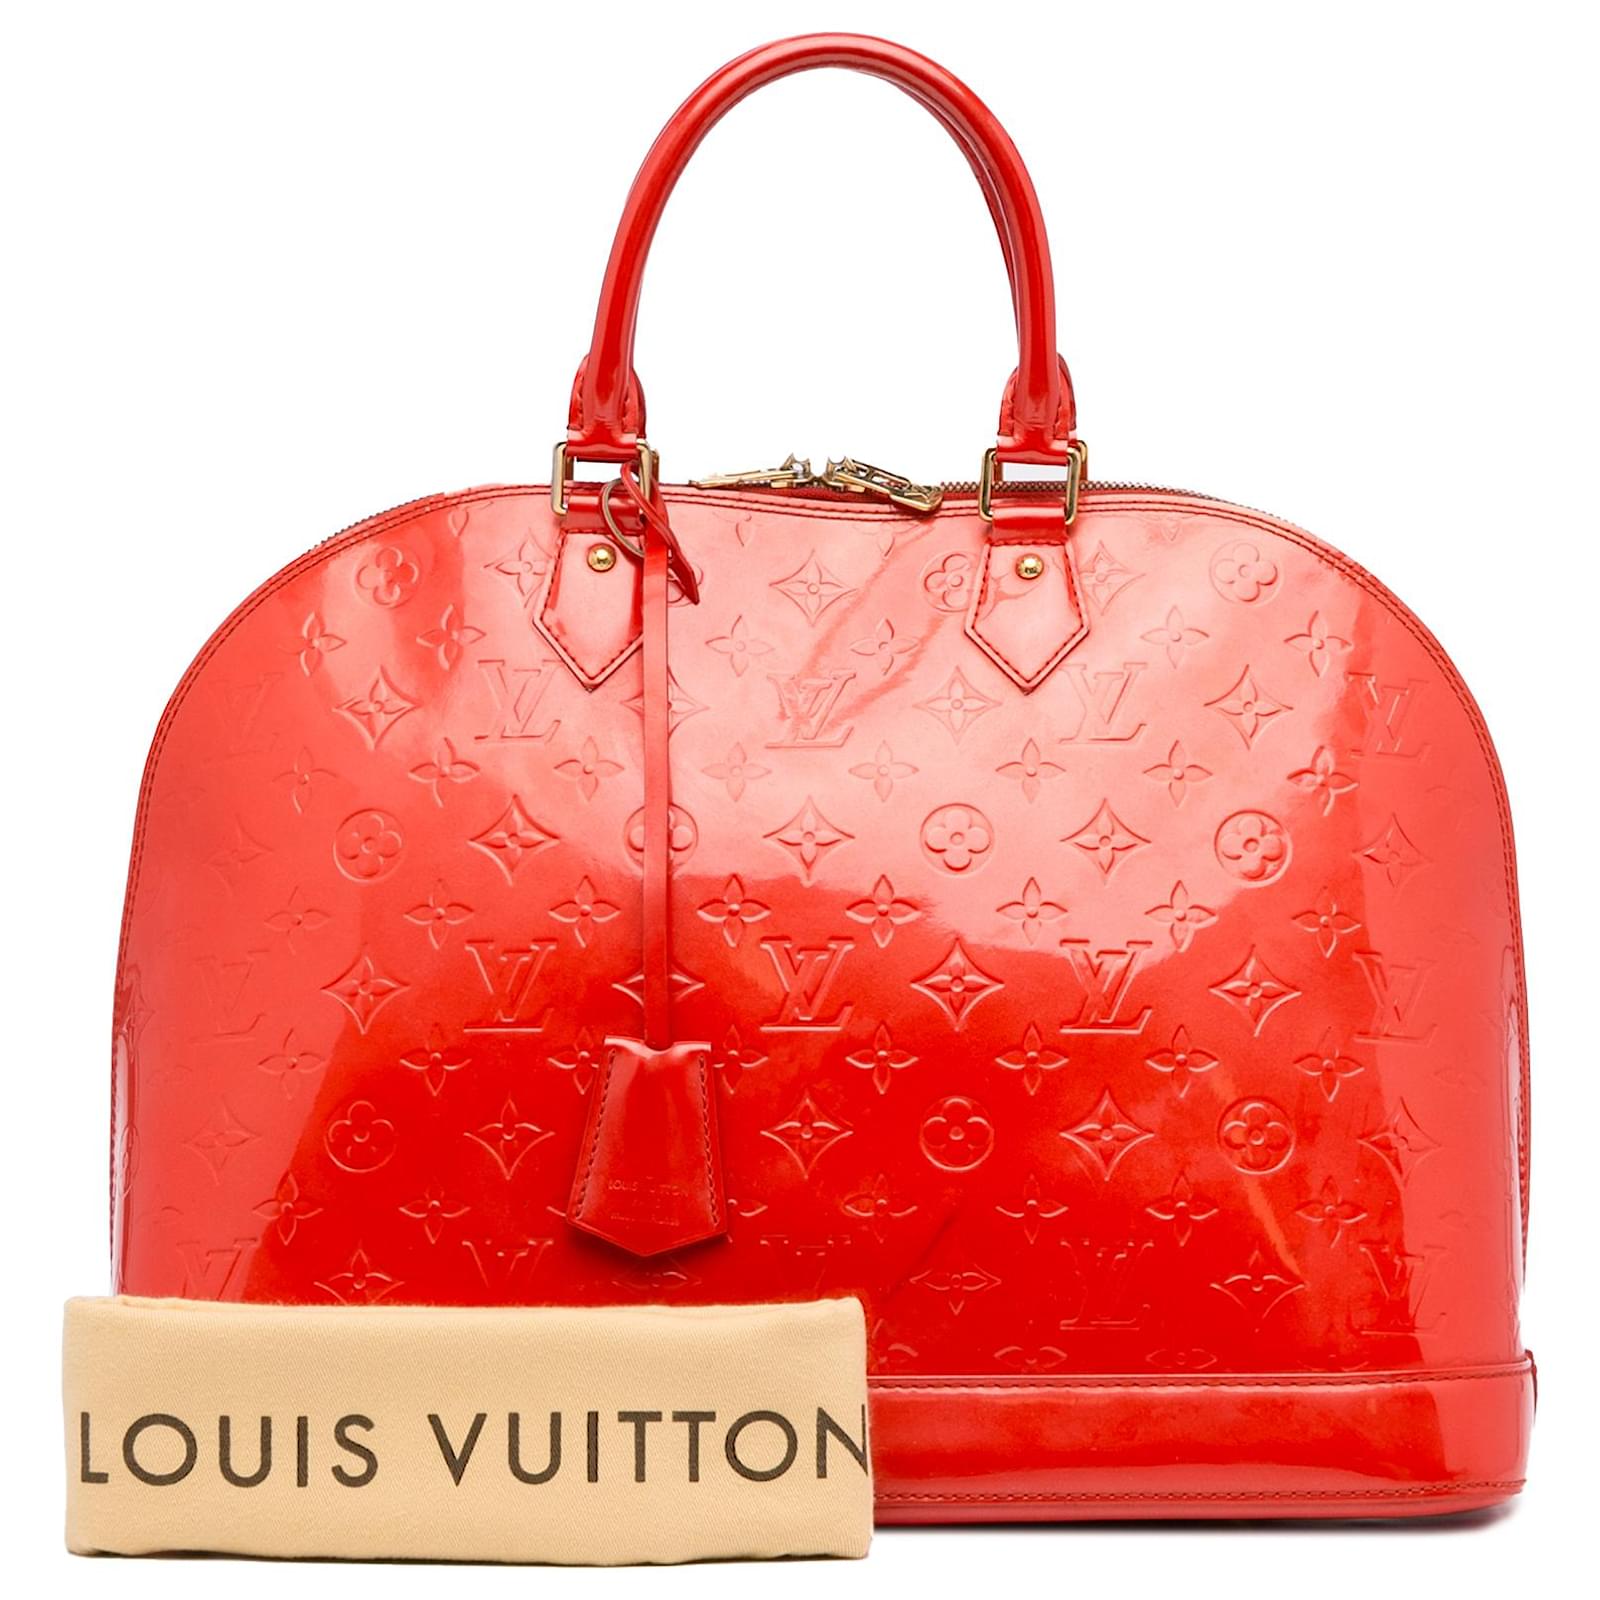 Louis Vuitton Red Monogram Vernis Alma GM Leather Patent leather